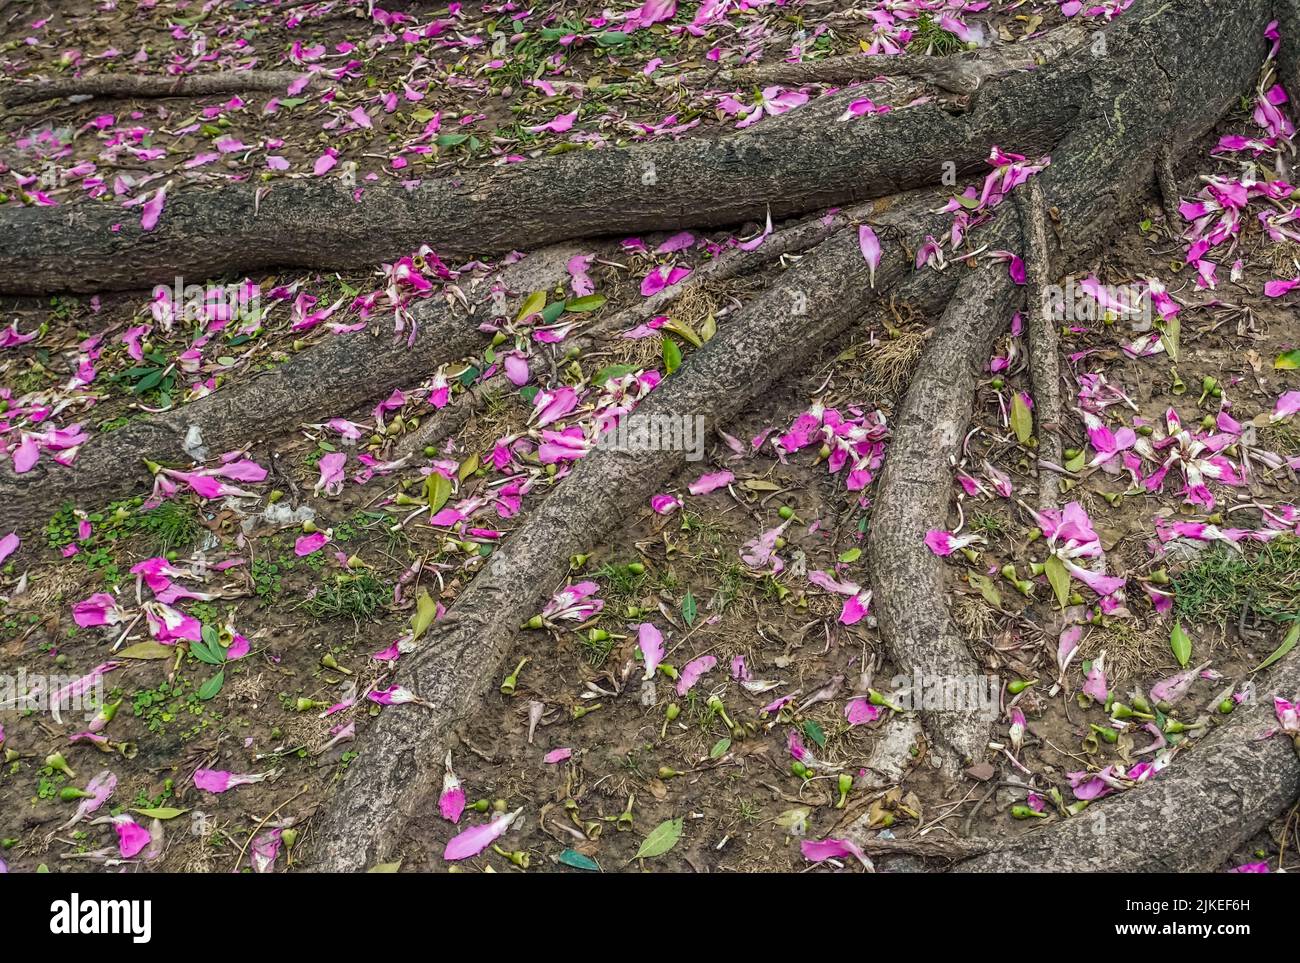 tree roots with flower petals Stock Photo